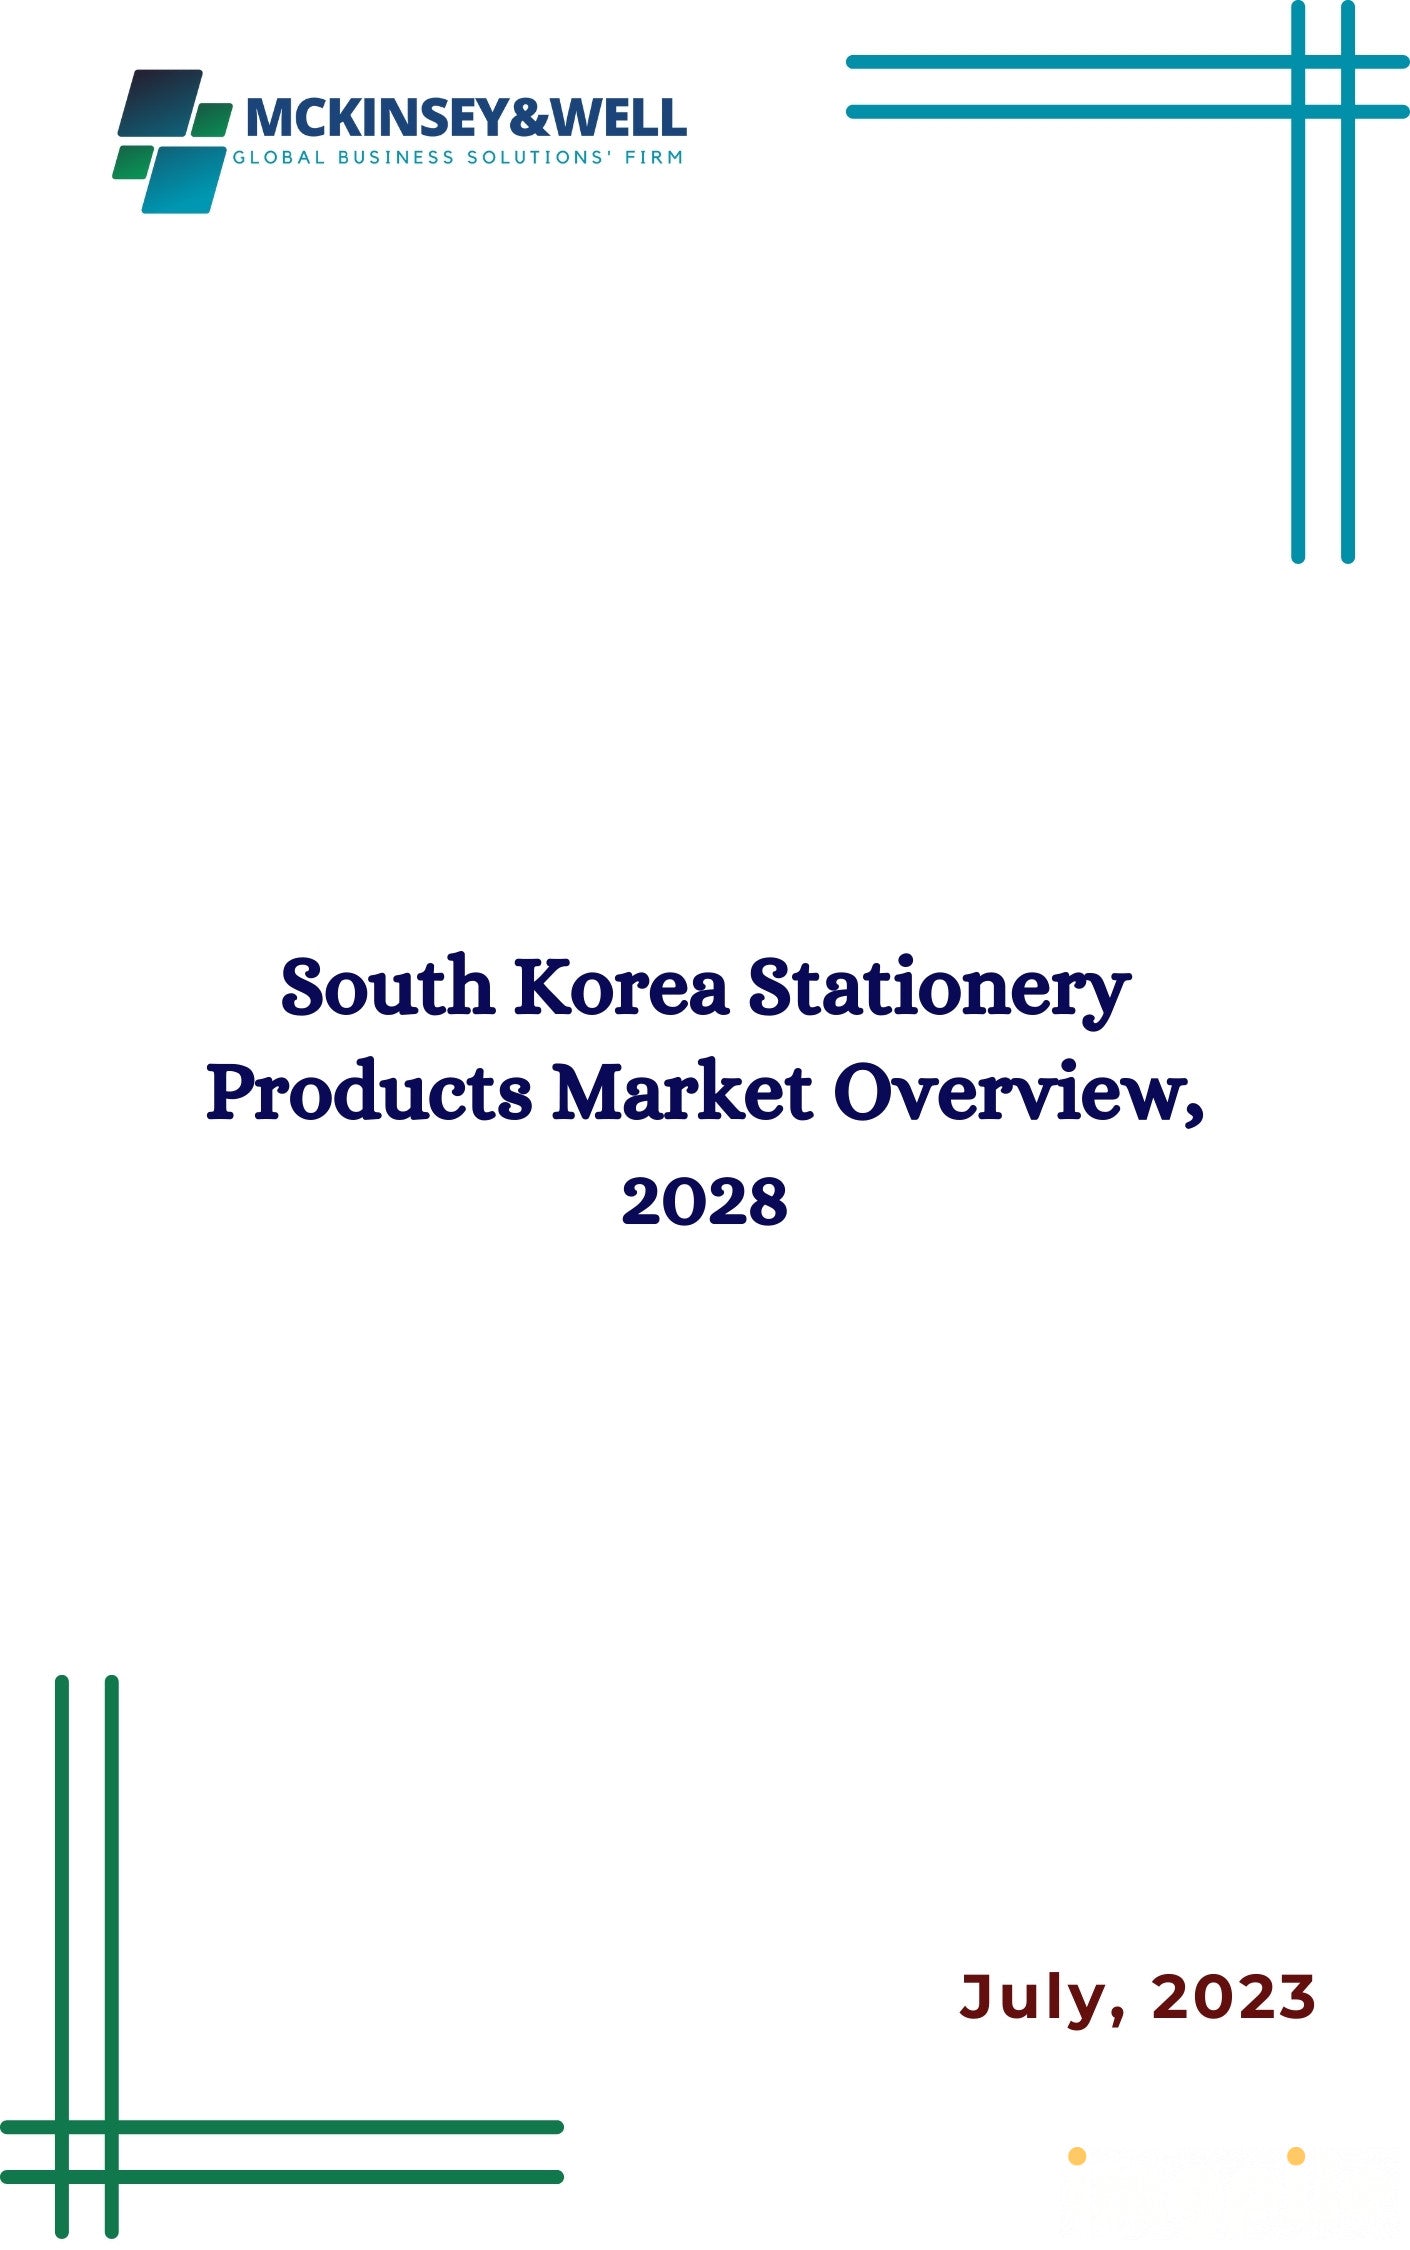 South Korea Stationery Products Market Overview, 2028